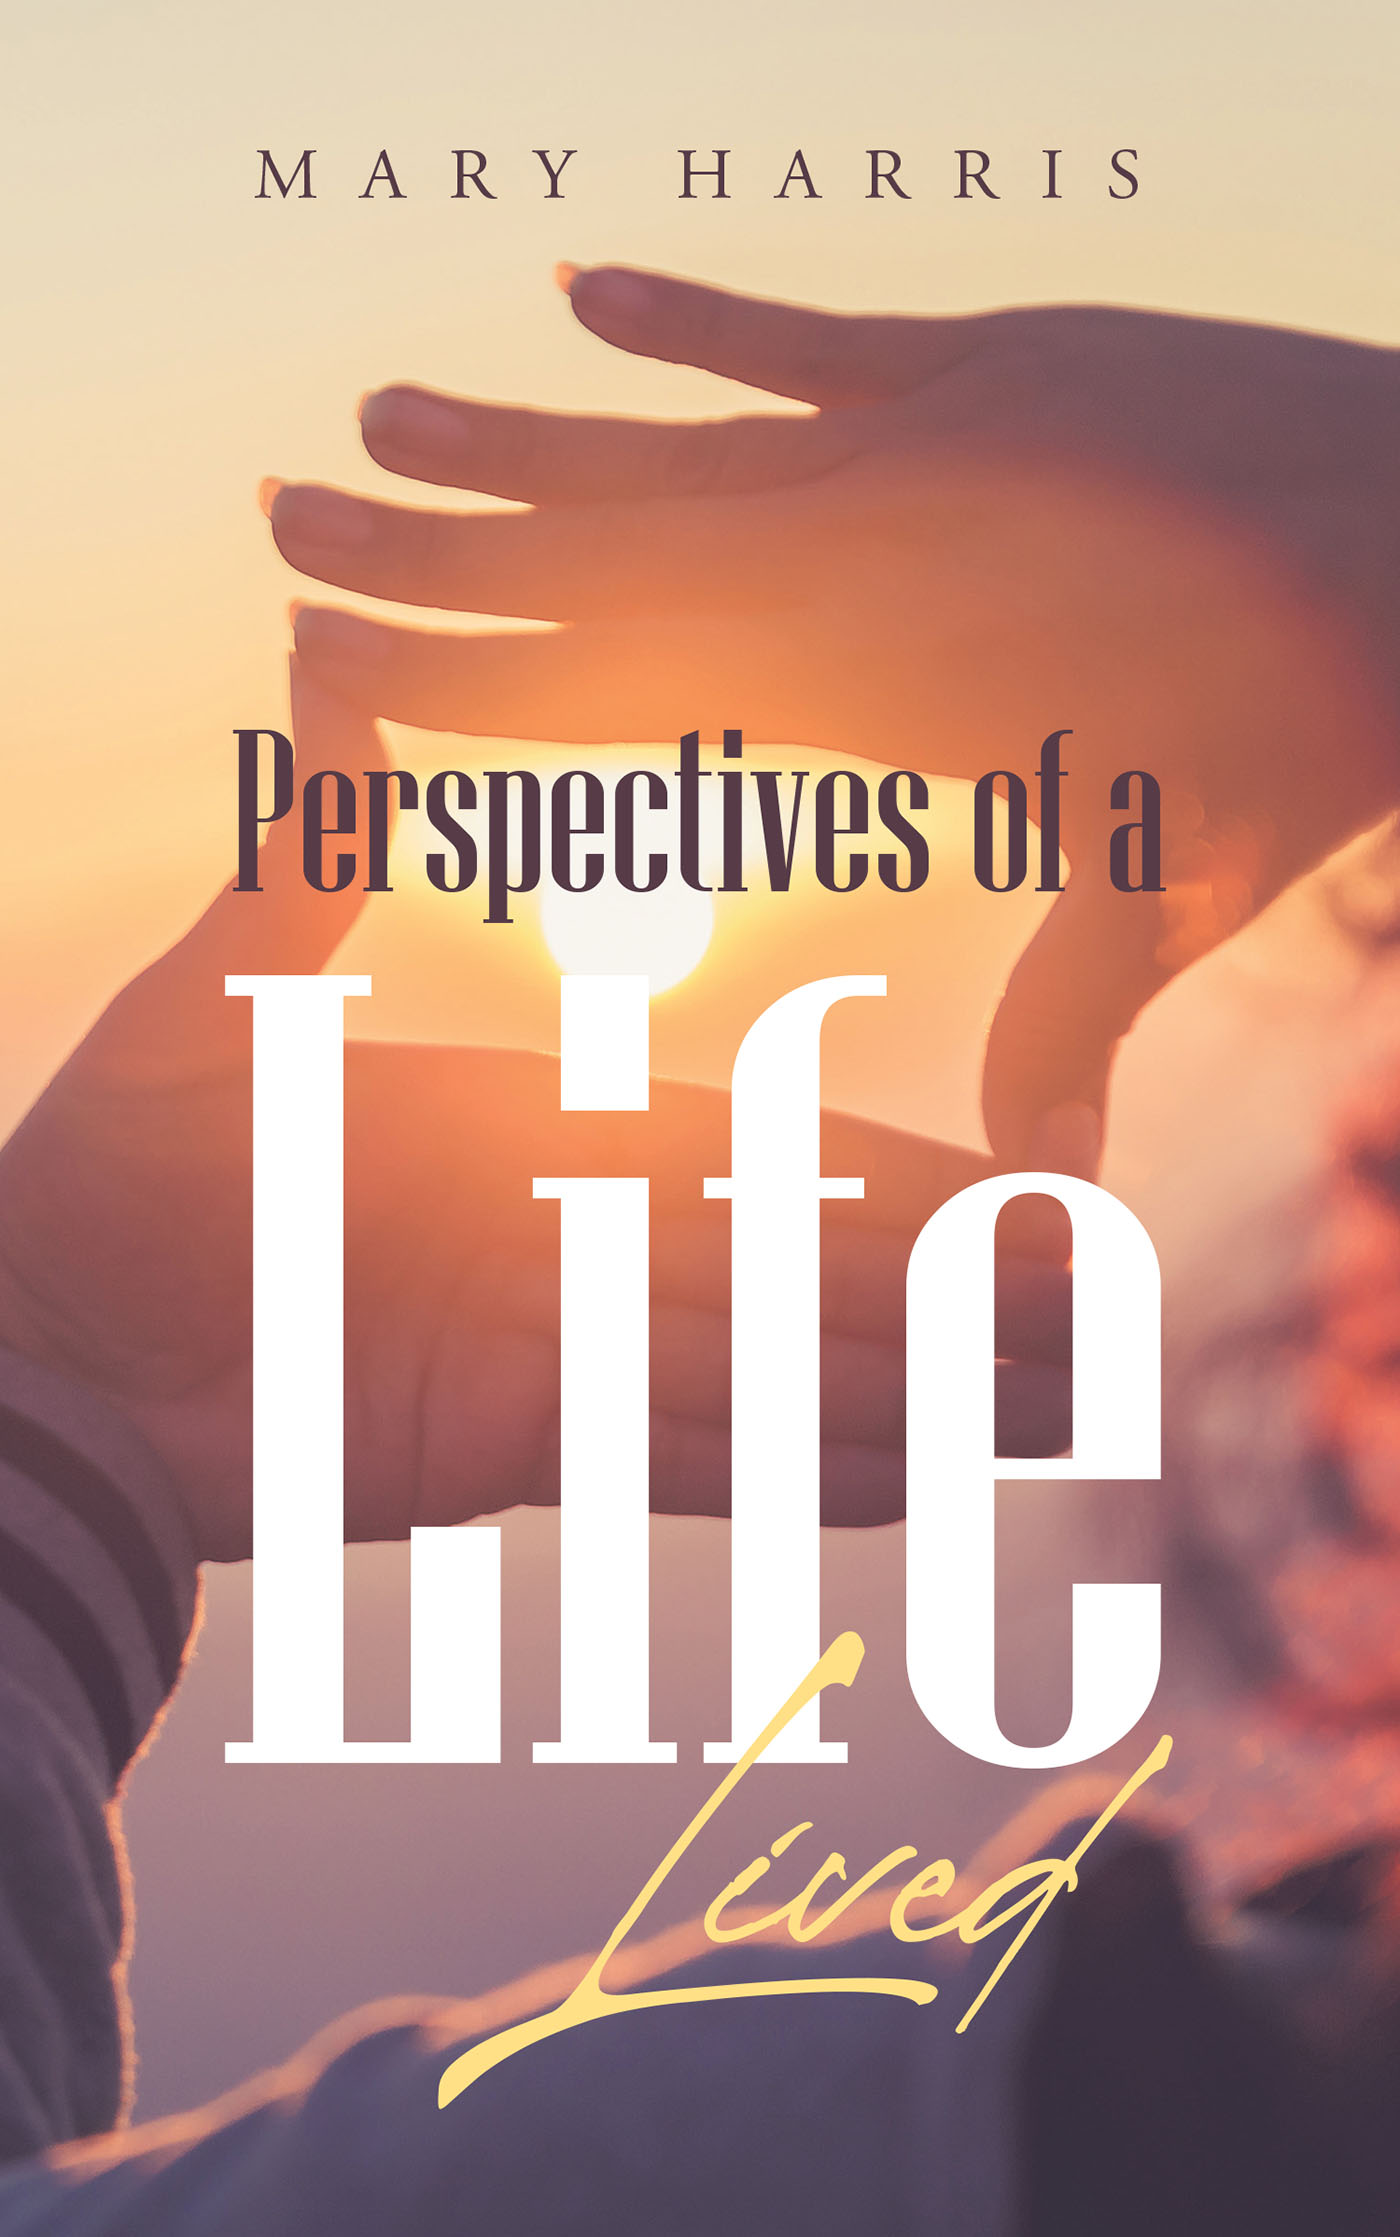 Author Mary Harris’s New Book, "Perspectives of a Life Lived," is a Collection of Evocative Poetry Exploring Universal Themes in the Human Experience